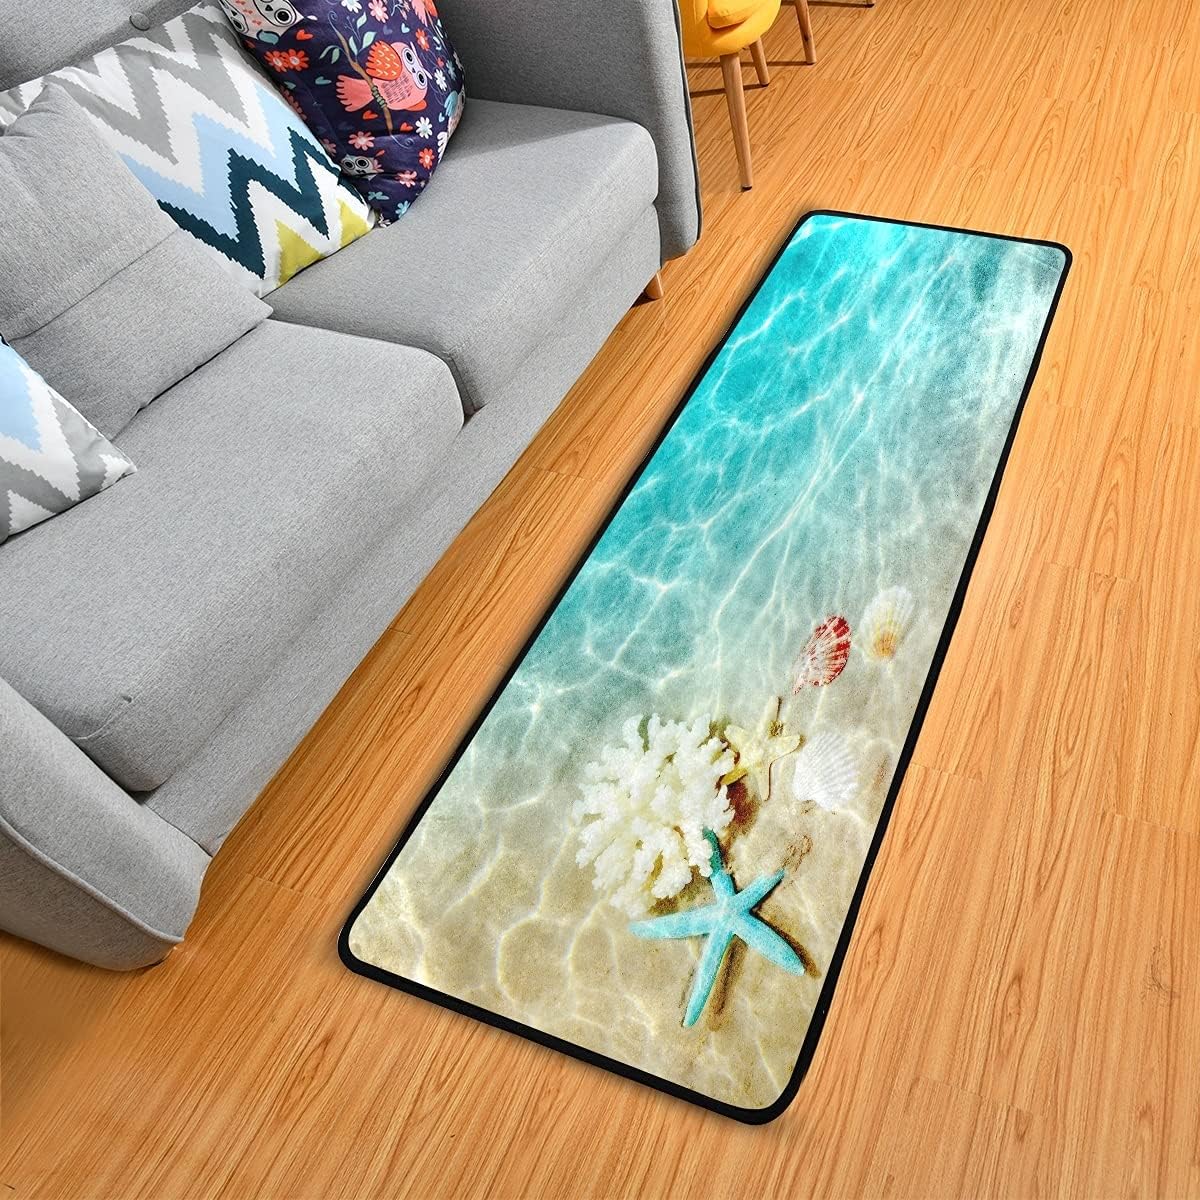 I bought two of these floor runners for our bedroom (its beach themed). They are beautiful!! They are so soft and very cushy.Not sure how they will wash because I havent had to wash them yet.Very pleased and worth the money 